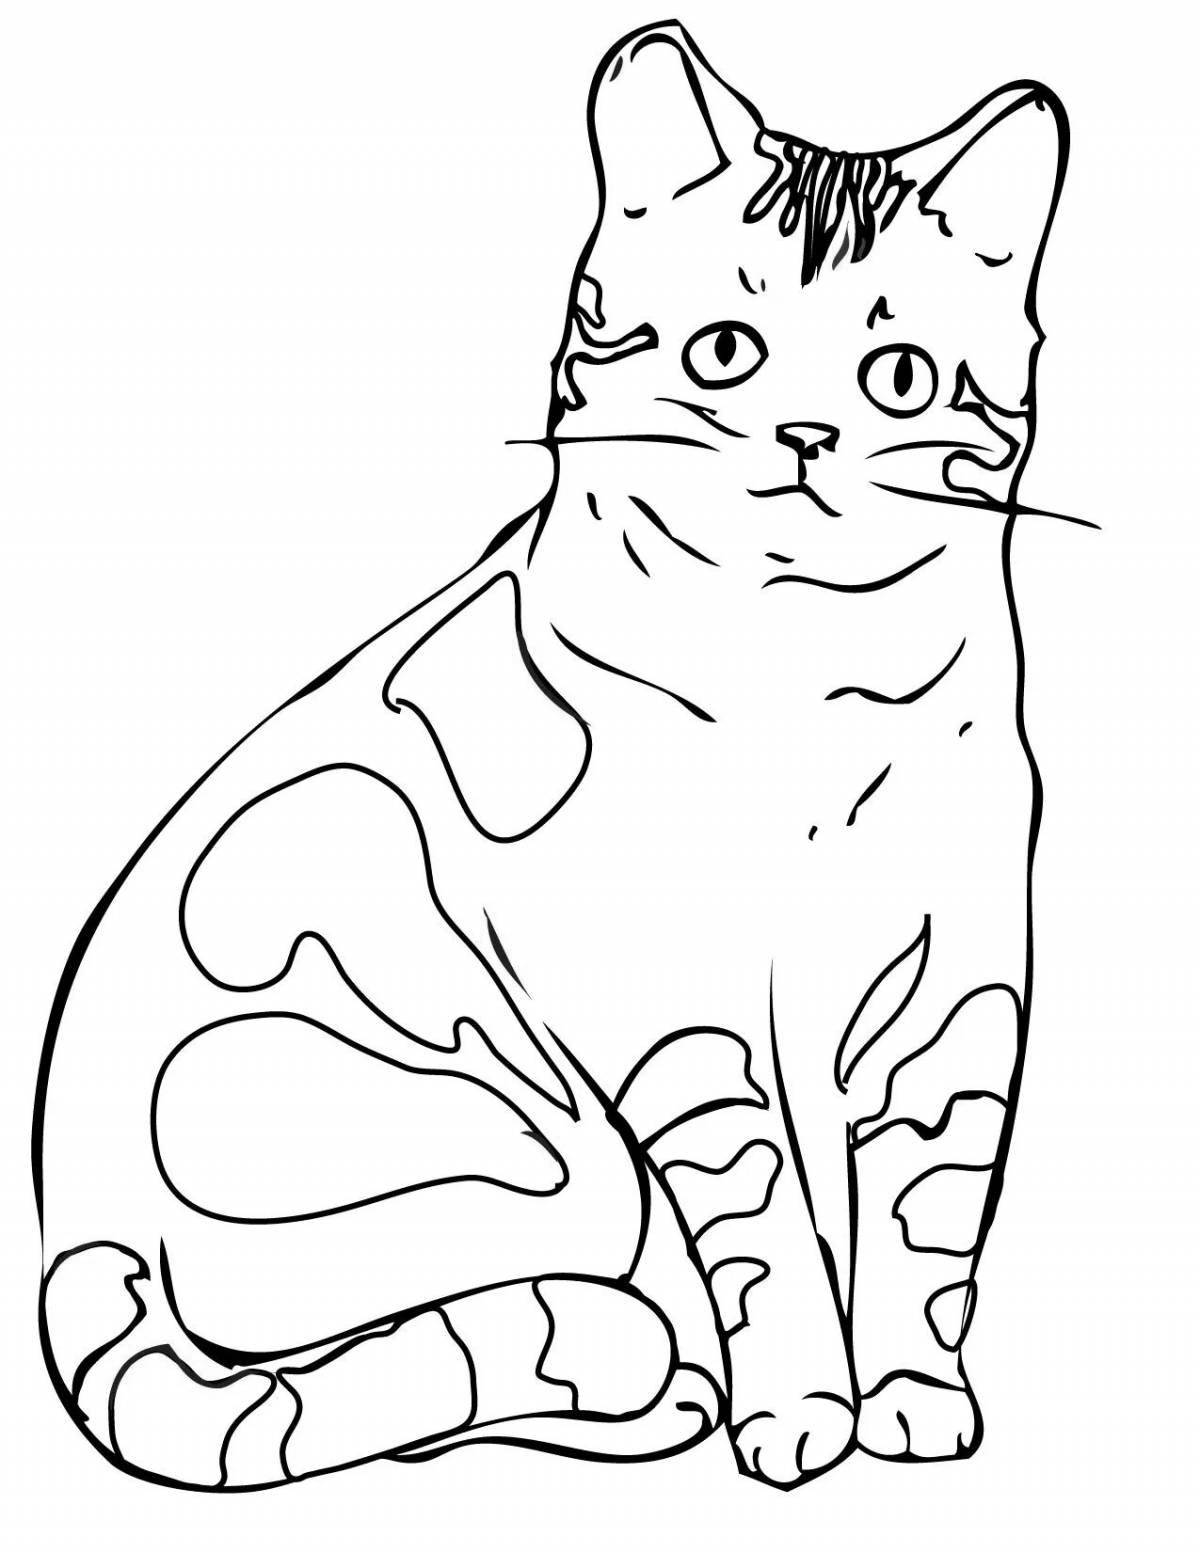 Adorable black and white cat coloring book